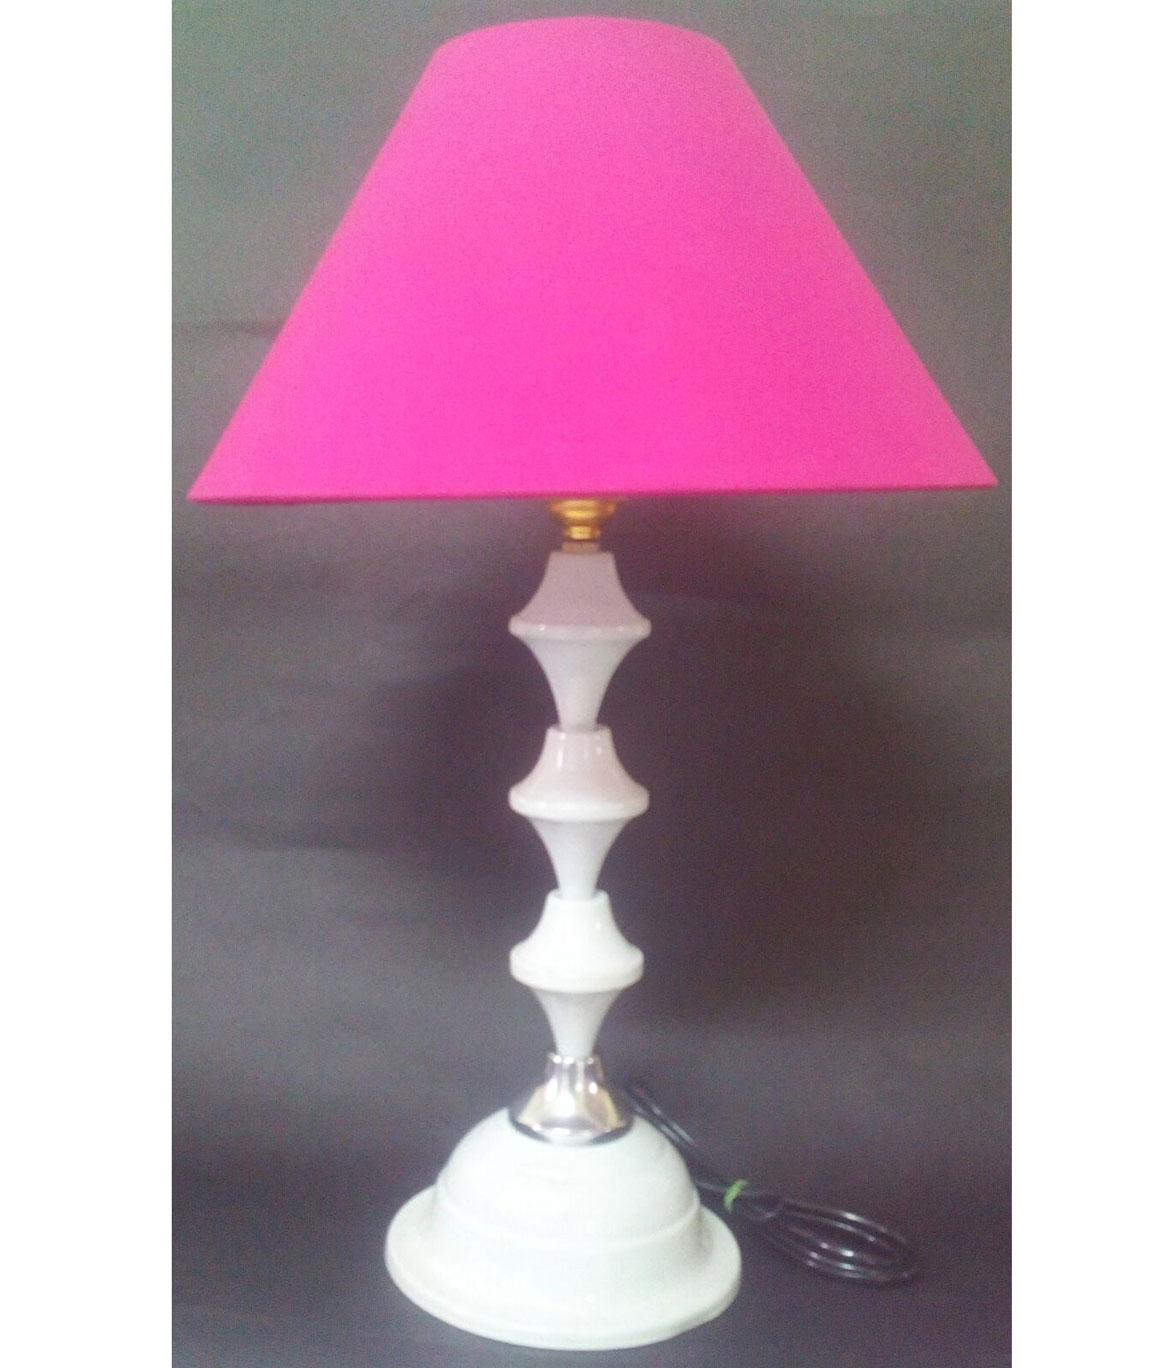 RDC White Silver Table Lamp with 10 Inches Round Plain Rani Pink Lamp Shade